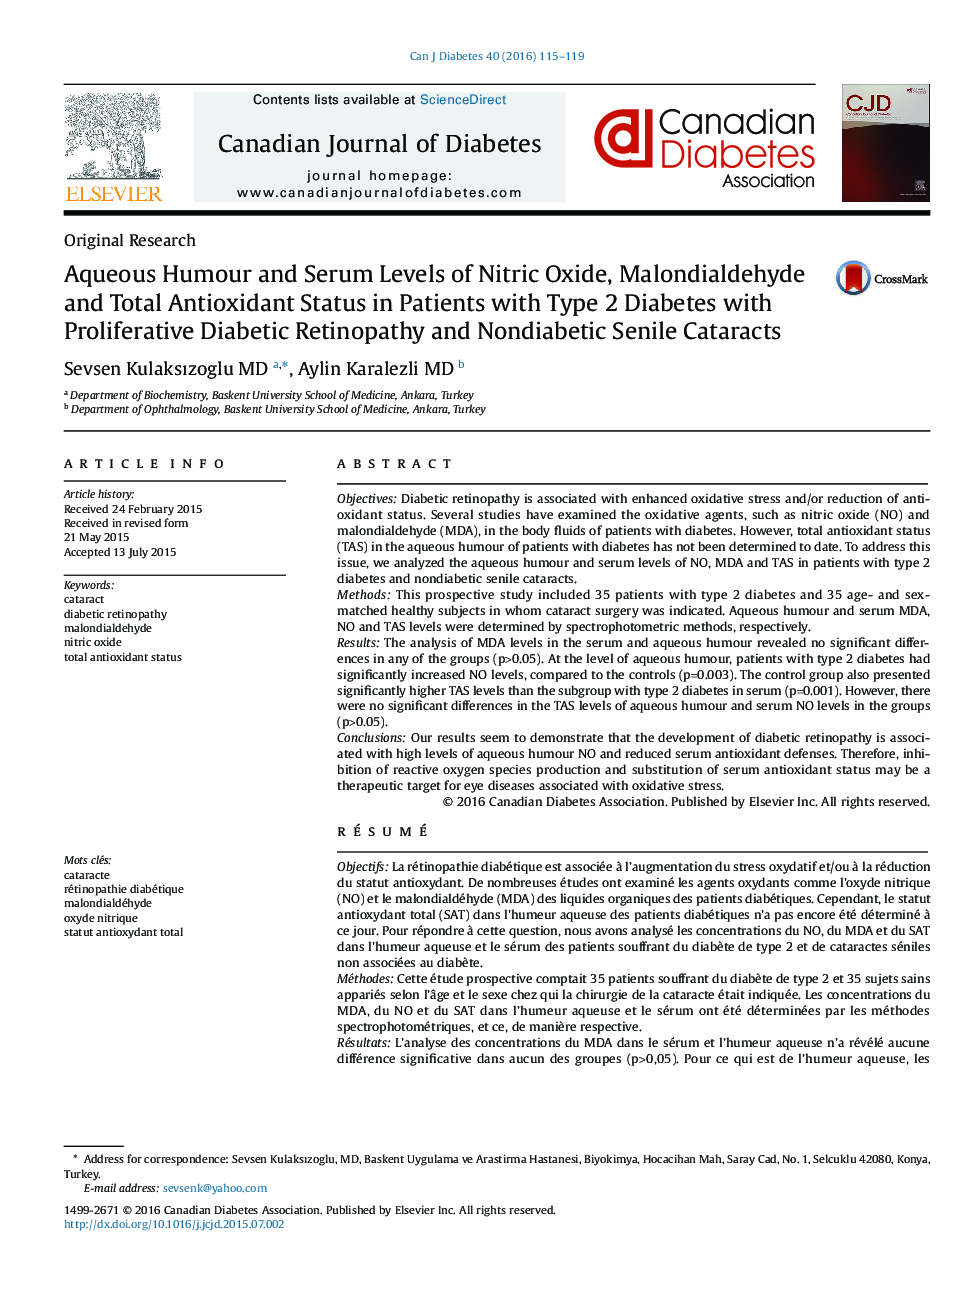 Aqueous Humour and Serum Levels of Nitric Oxide, Malondialdehyde and Total Antioxidant Status in Patients with Type 2 Diabetes with Proliferative Diabetic Retinopathy and Nondiabetic Senile Cataracts